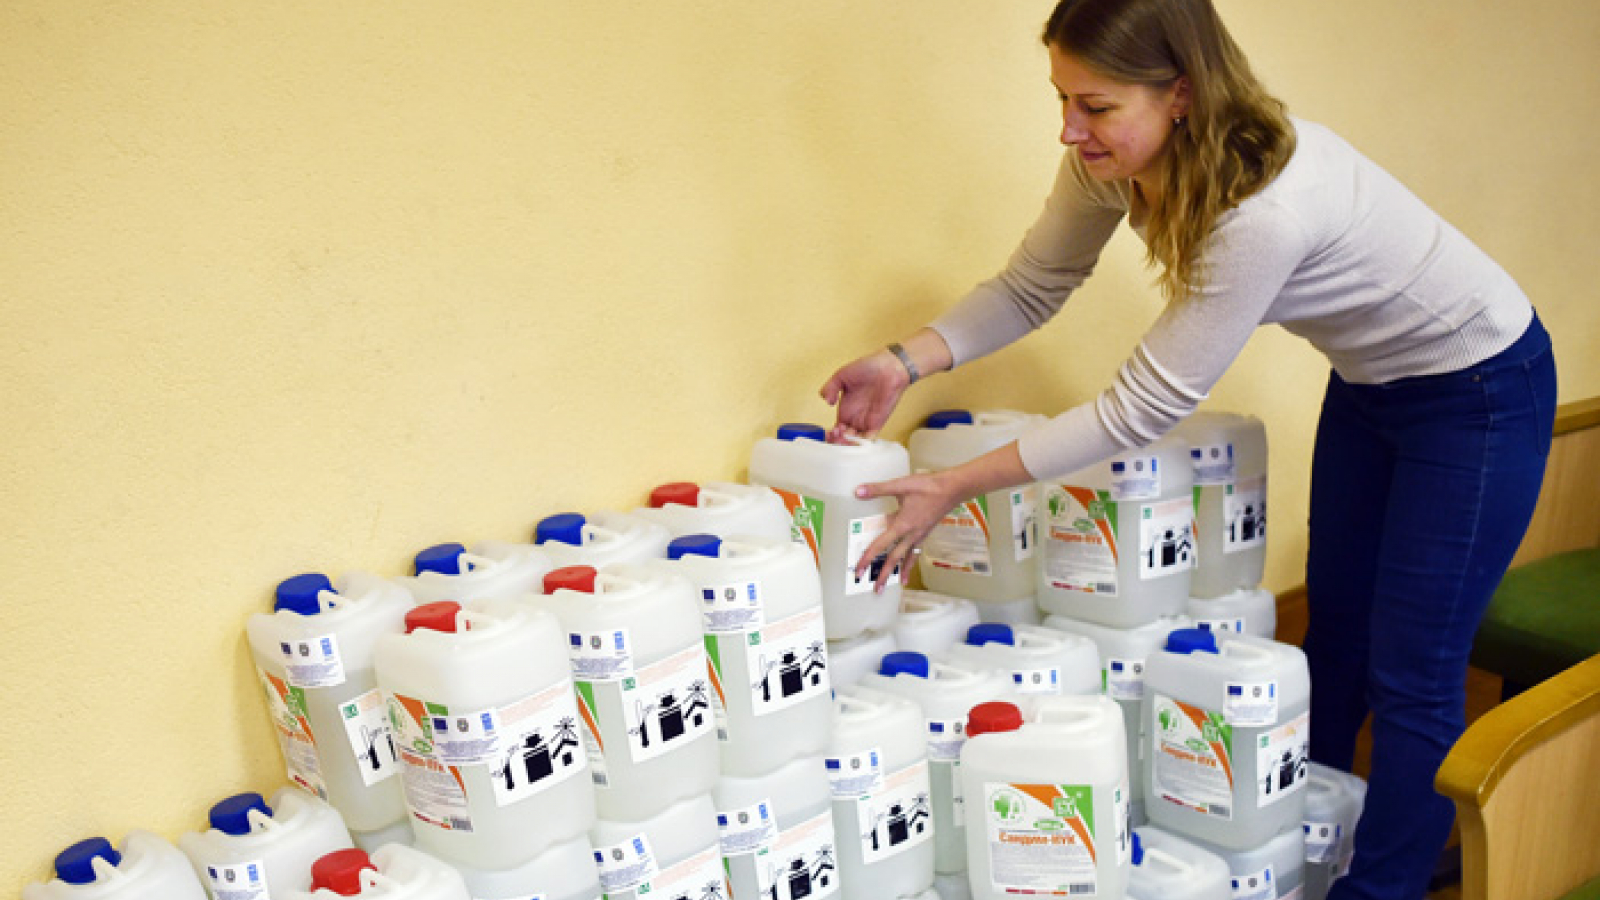 EU-funded project delivers over 1,000 litres of disinfectant to educational institutions in Belarus